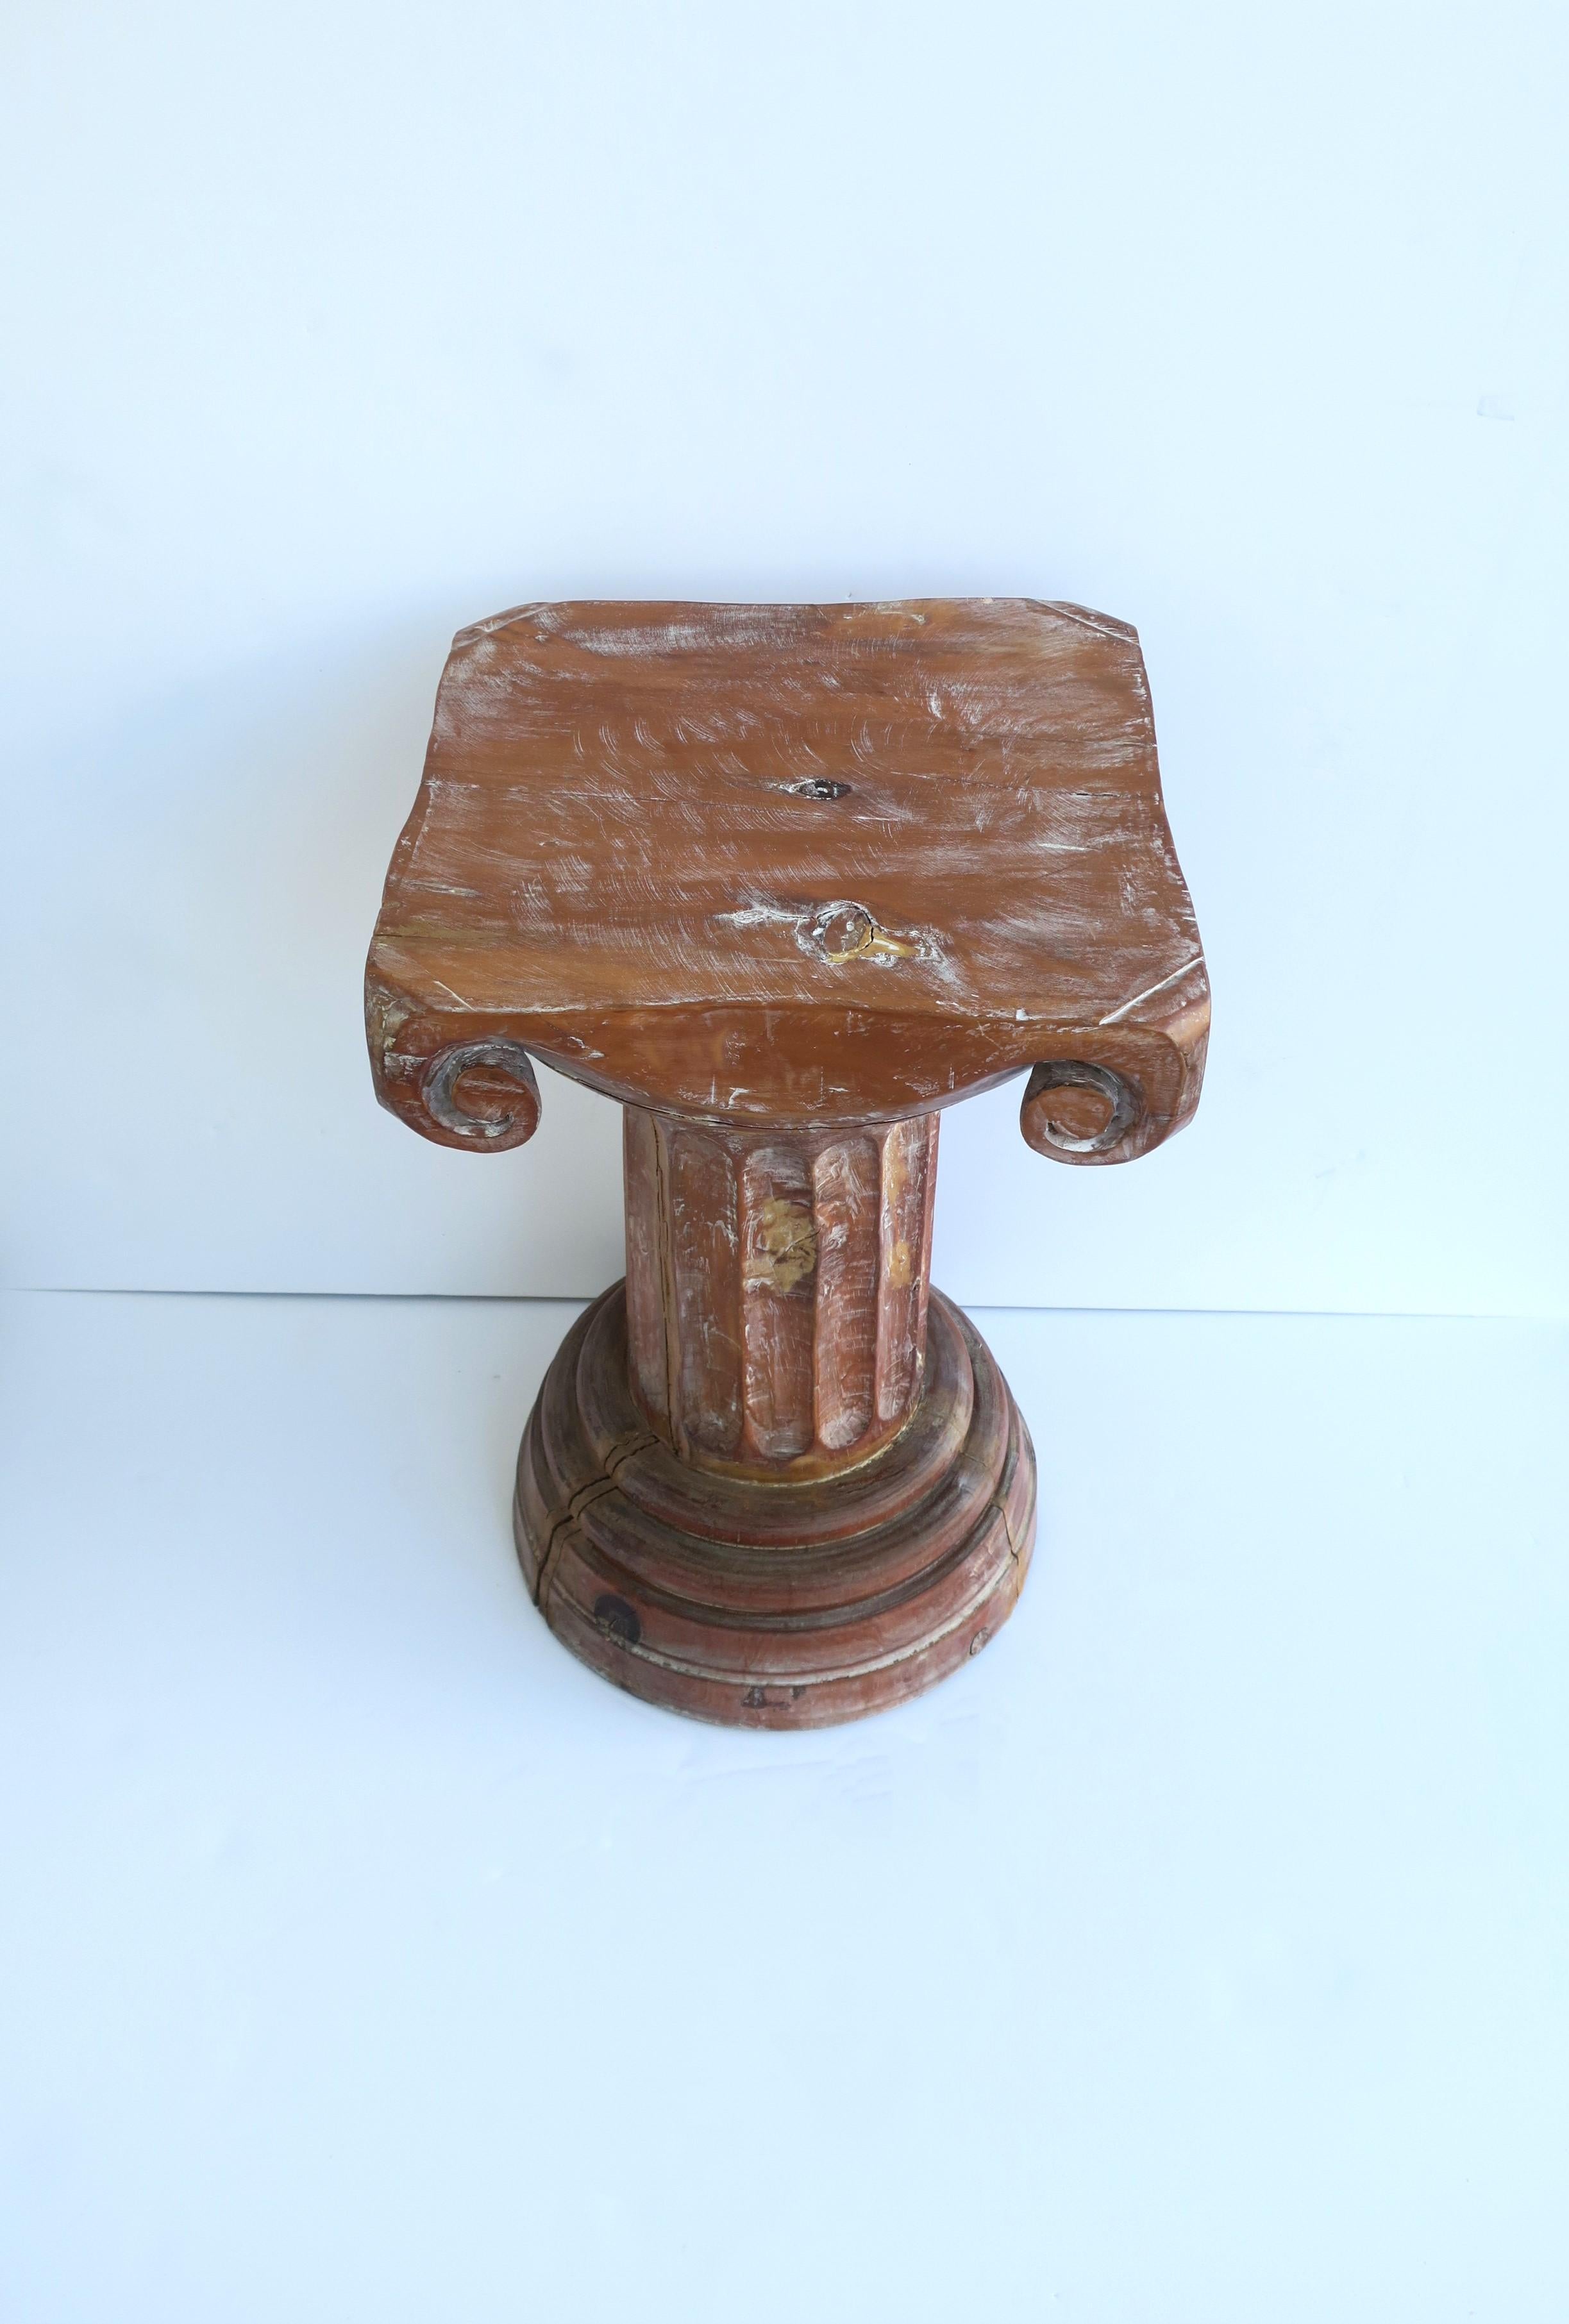 Wood Column Pedestal Table Neoclassical for Sculpture or Cocktail For Sale 1